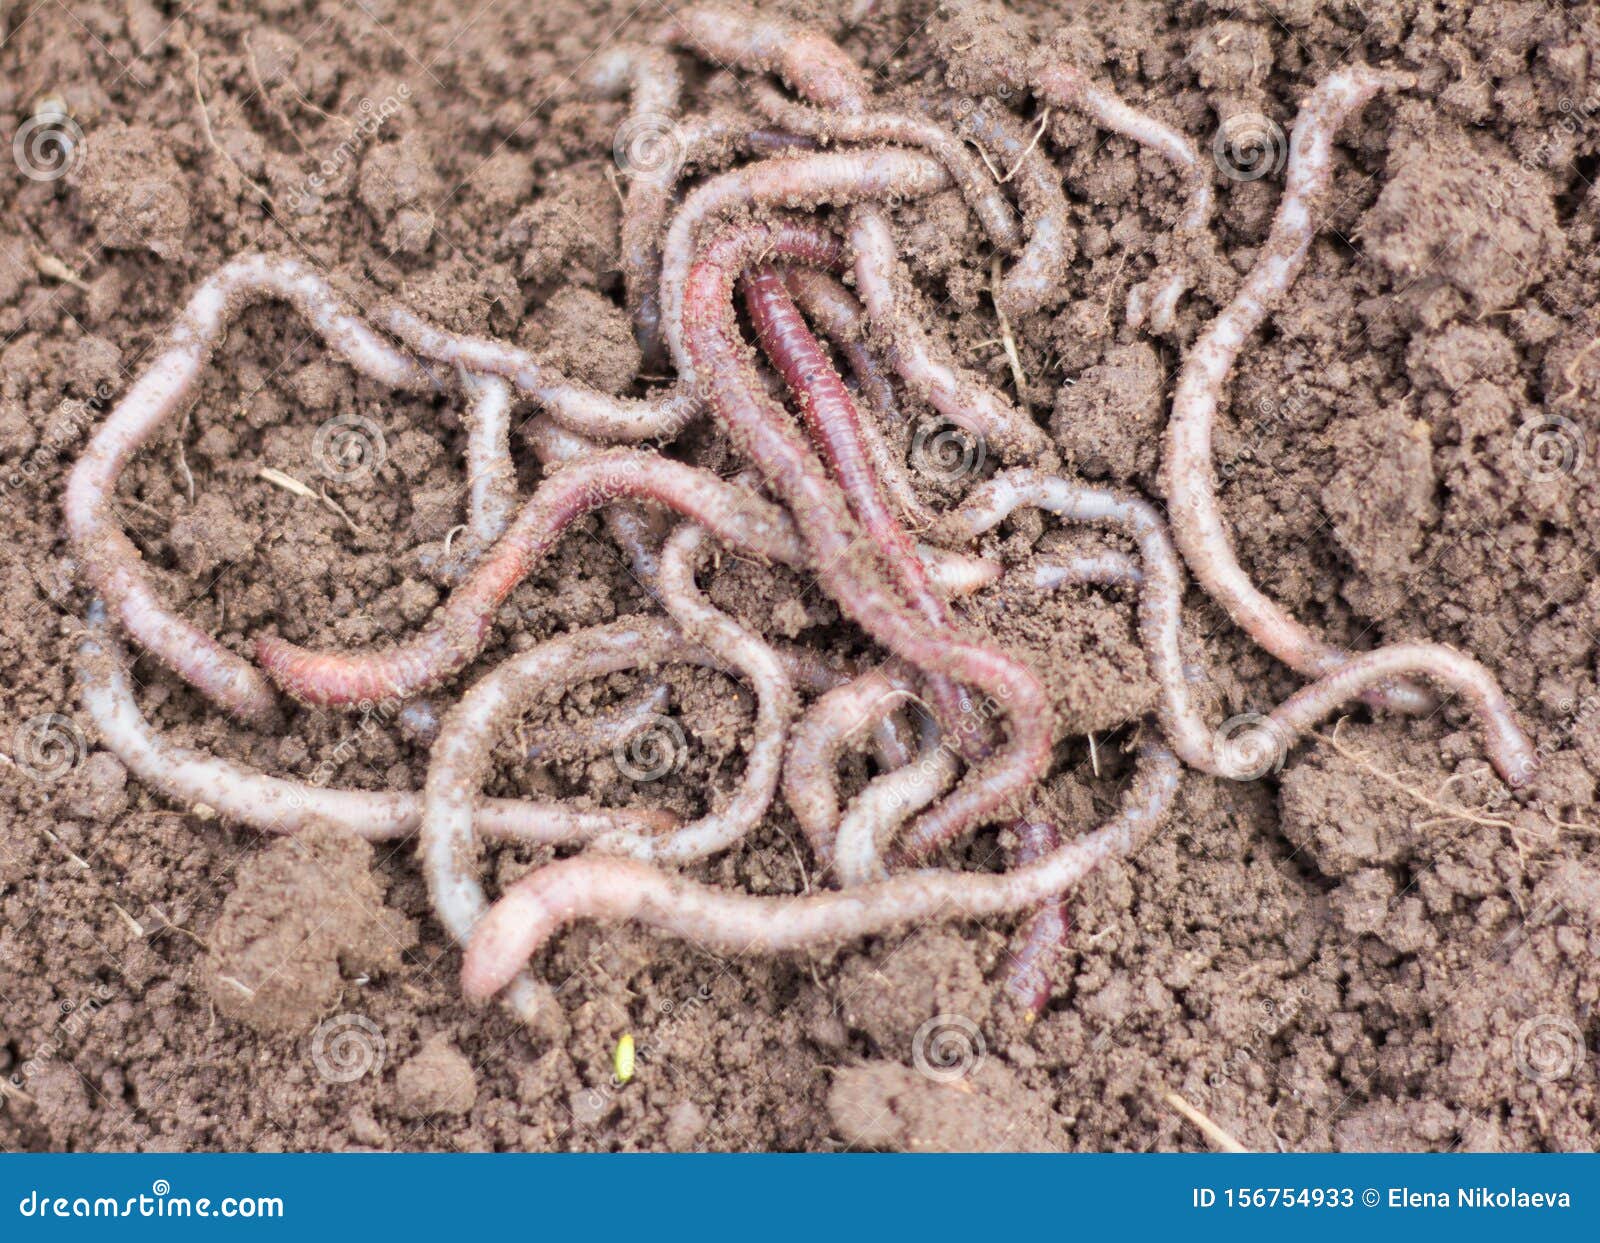 245 Red Manure Worms Background Stock Photos - Free & Royalty-Free Stock  Photos from Dreamstime